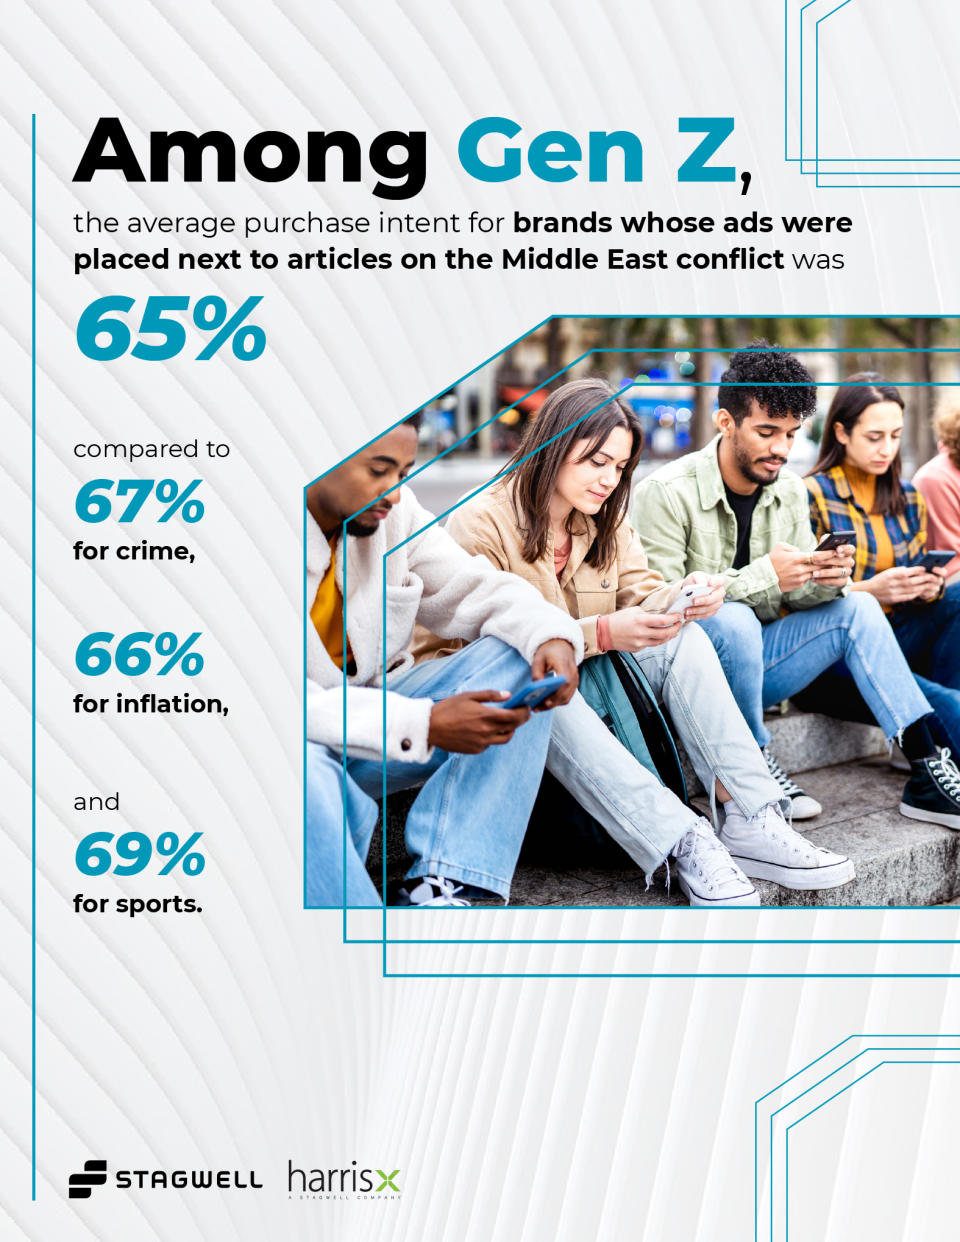 Results debunk brand safety myths among key demographic groups for advertisers, such as Gen Z.